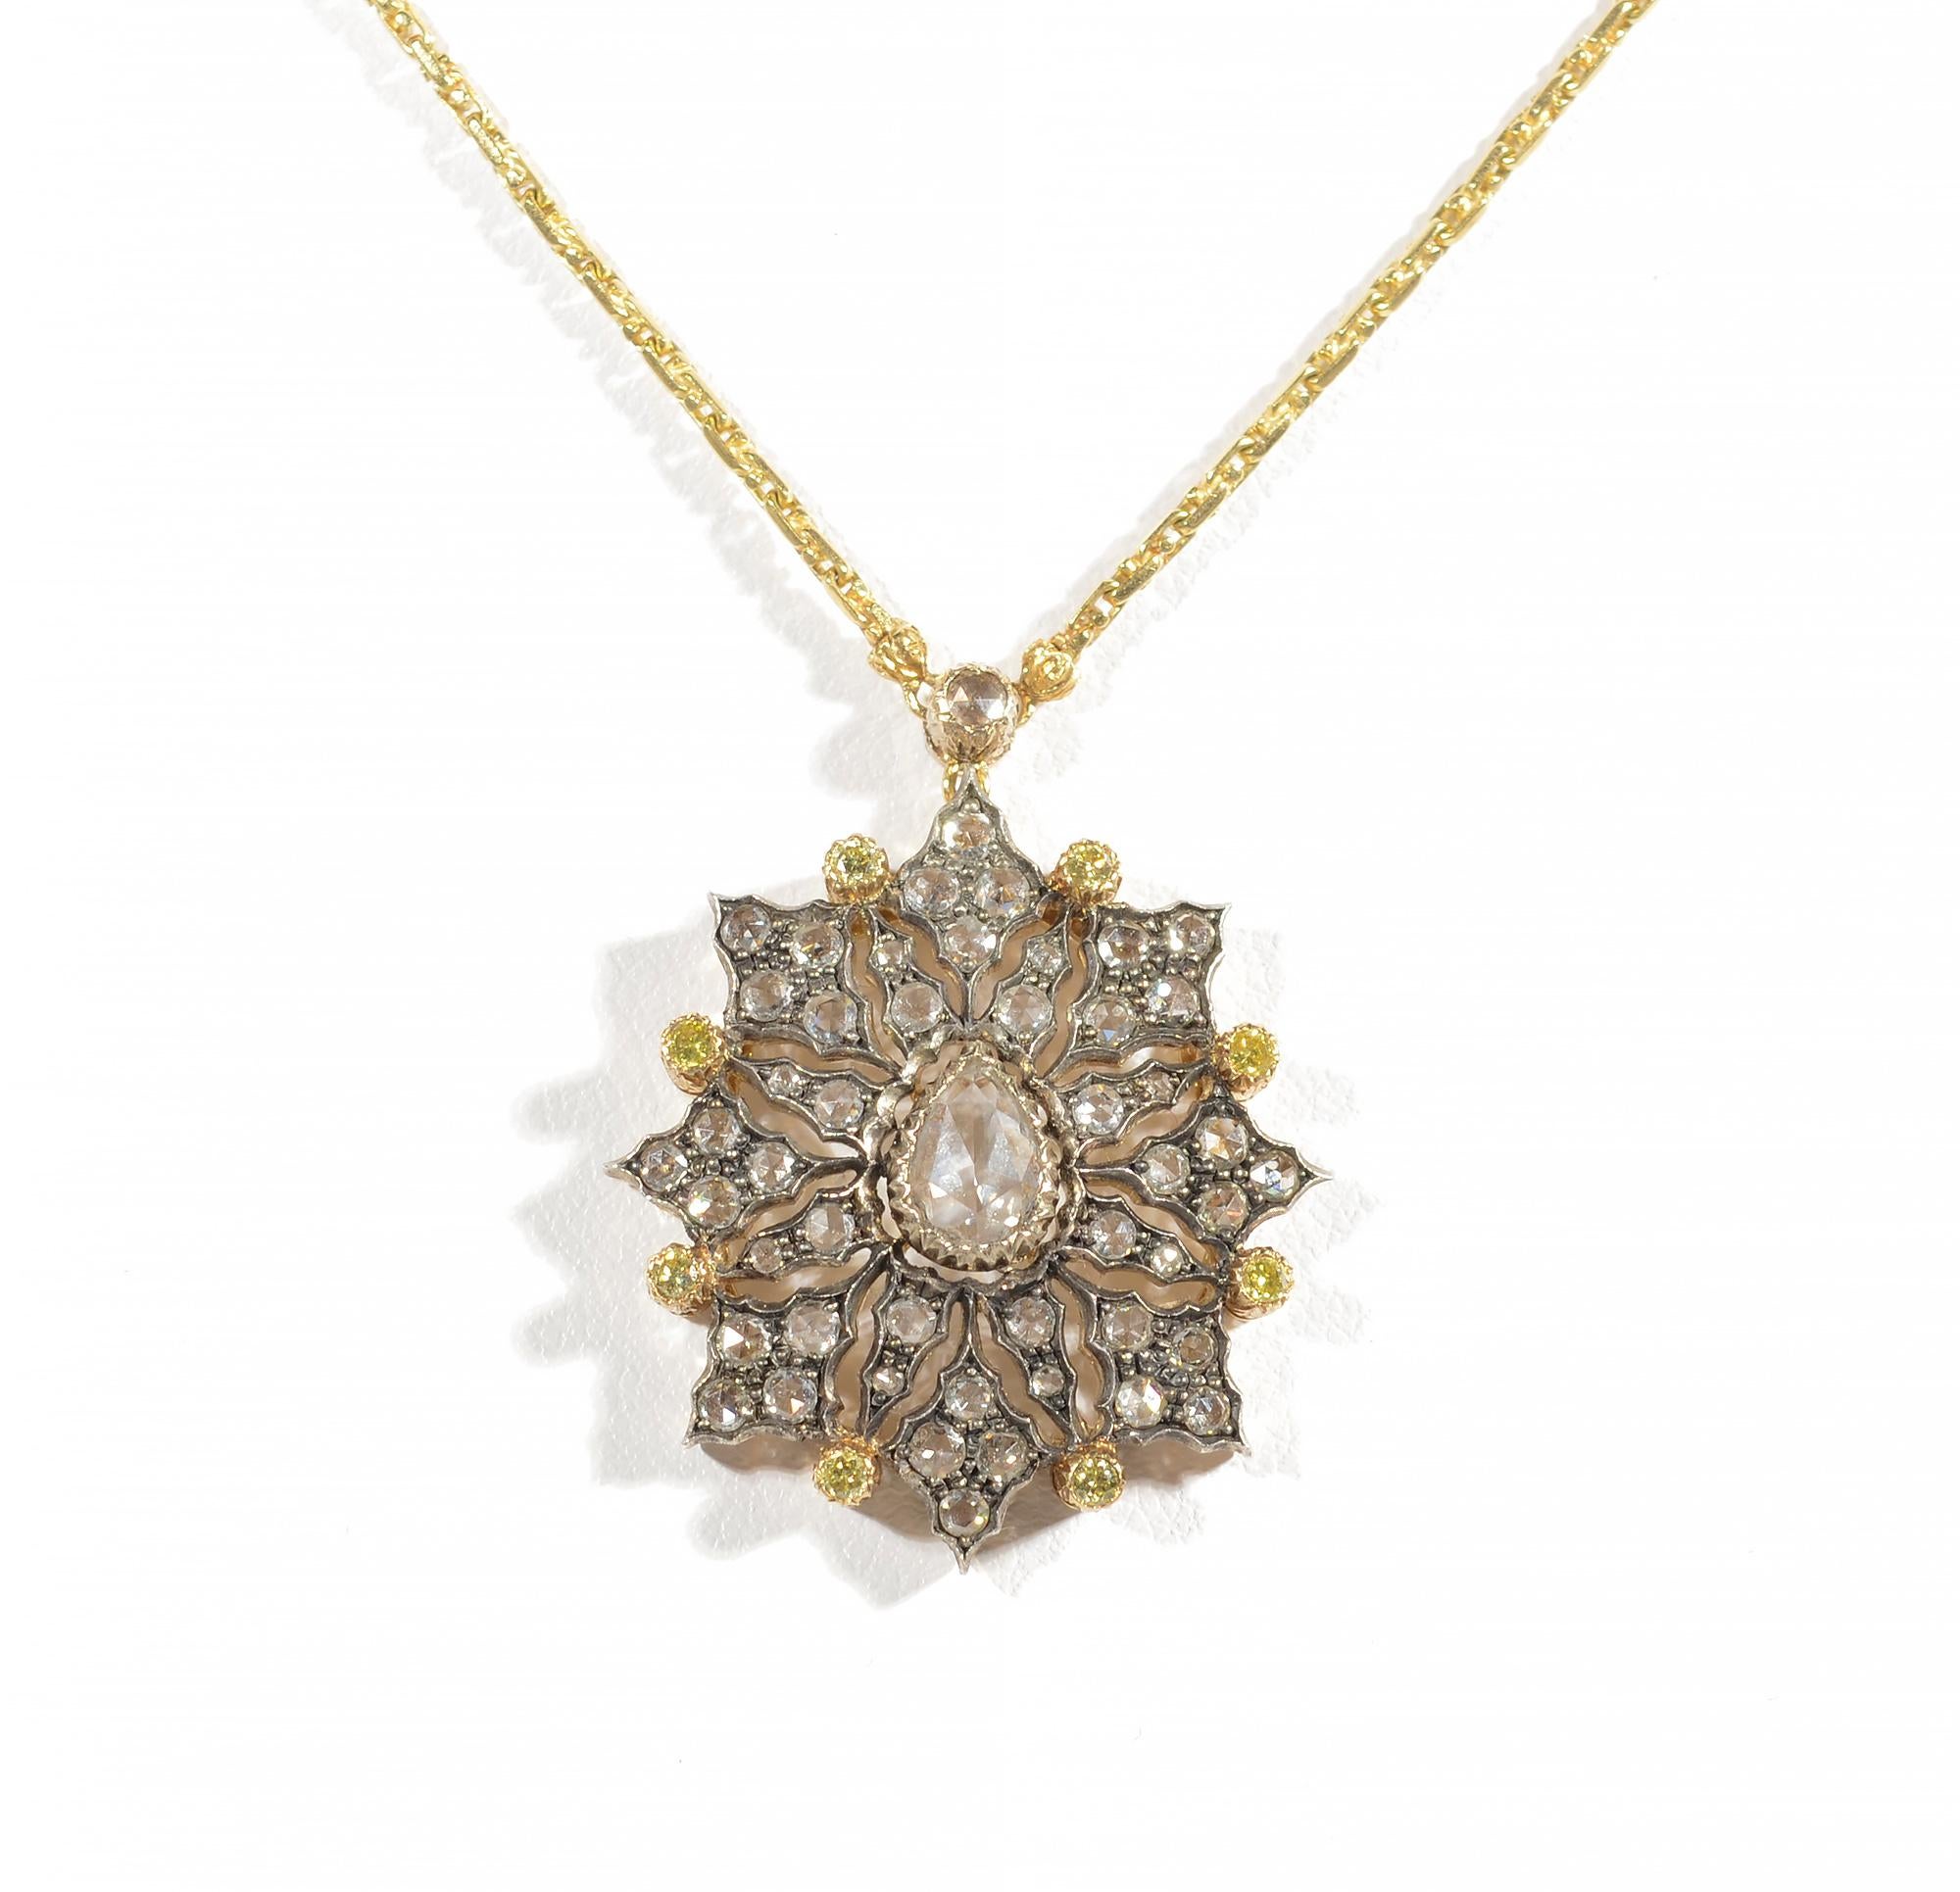 Delicate pendant necklace by Buccellati with rose cut and yellow diamonds. The pear shaped center stone is approximately 4.5 carats of an H color; VS clarity rose cut diamond. The eight point star-like design is made of 49 rose cut diamonds with a